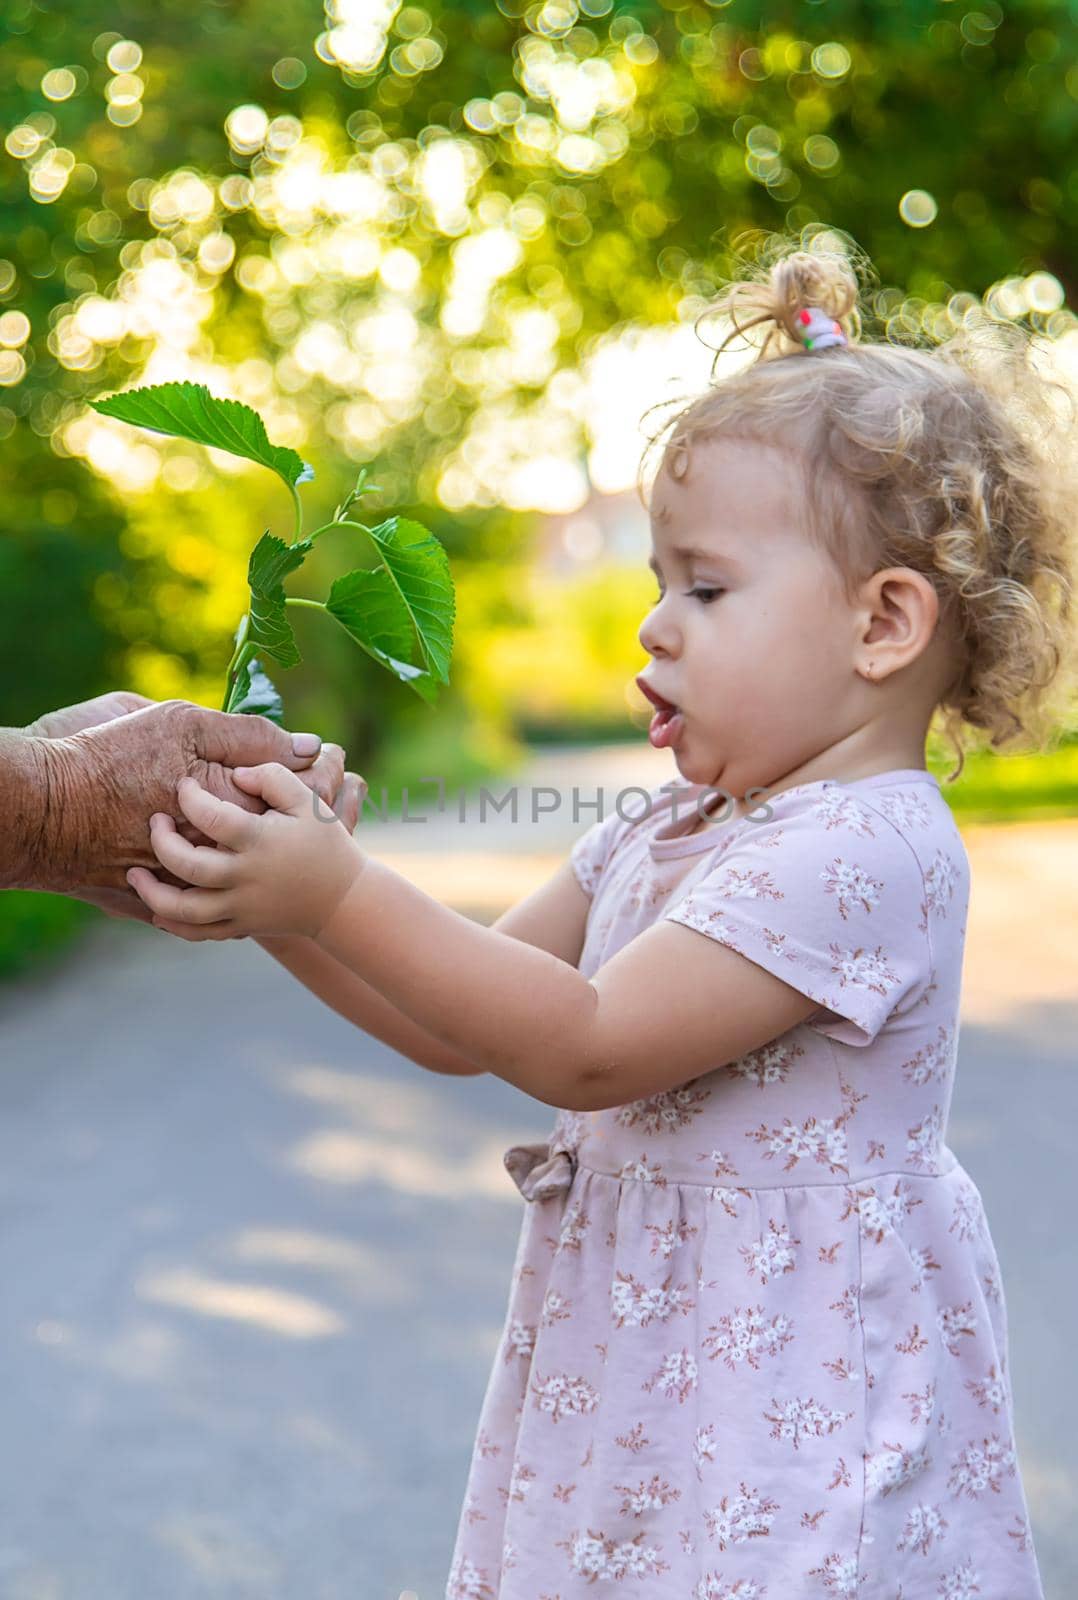 The child and grandmother are planting a tree. Selective focus. by yanadjana